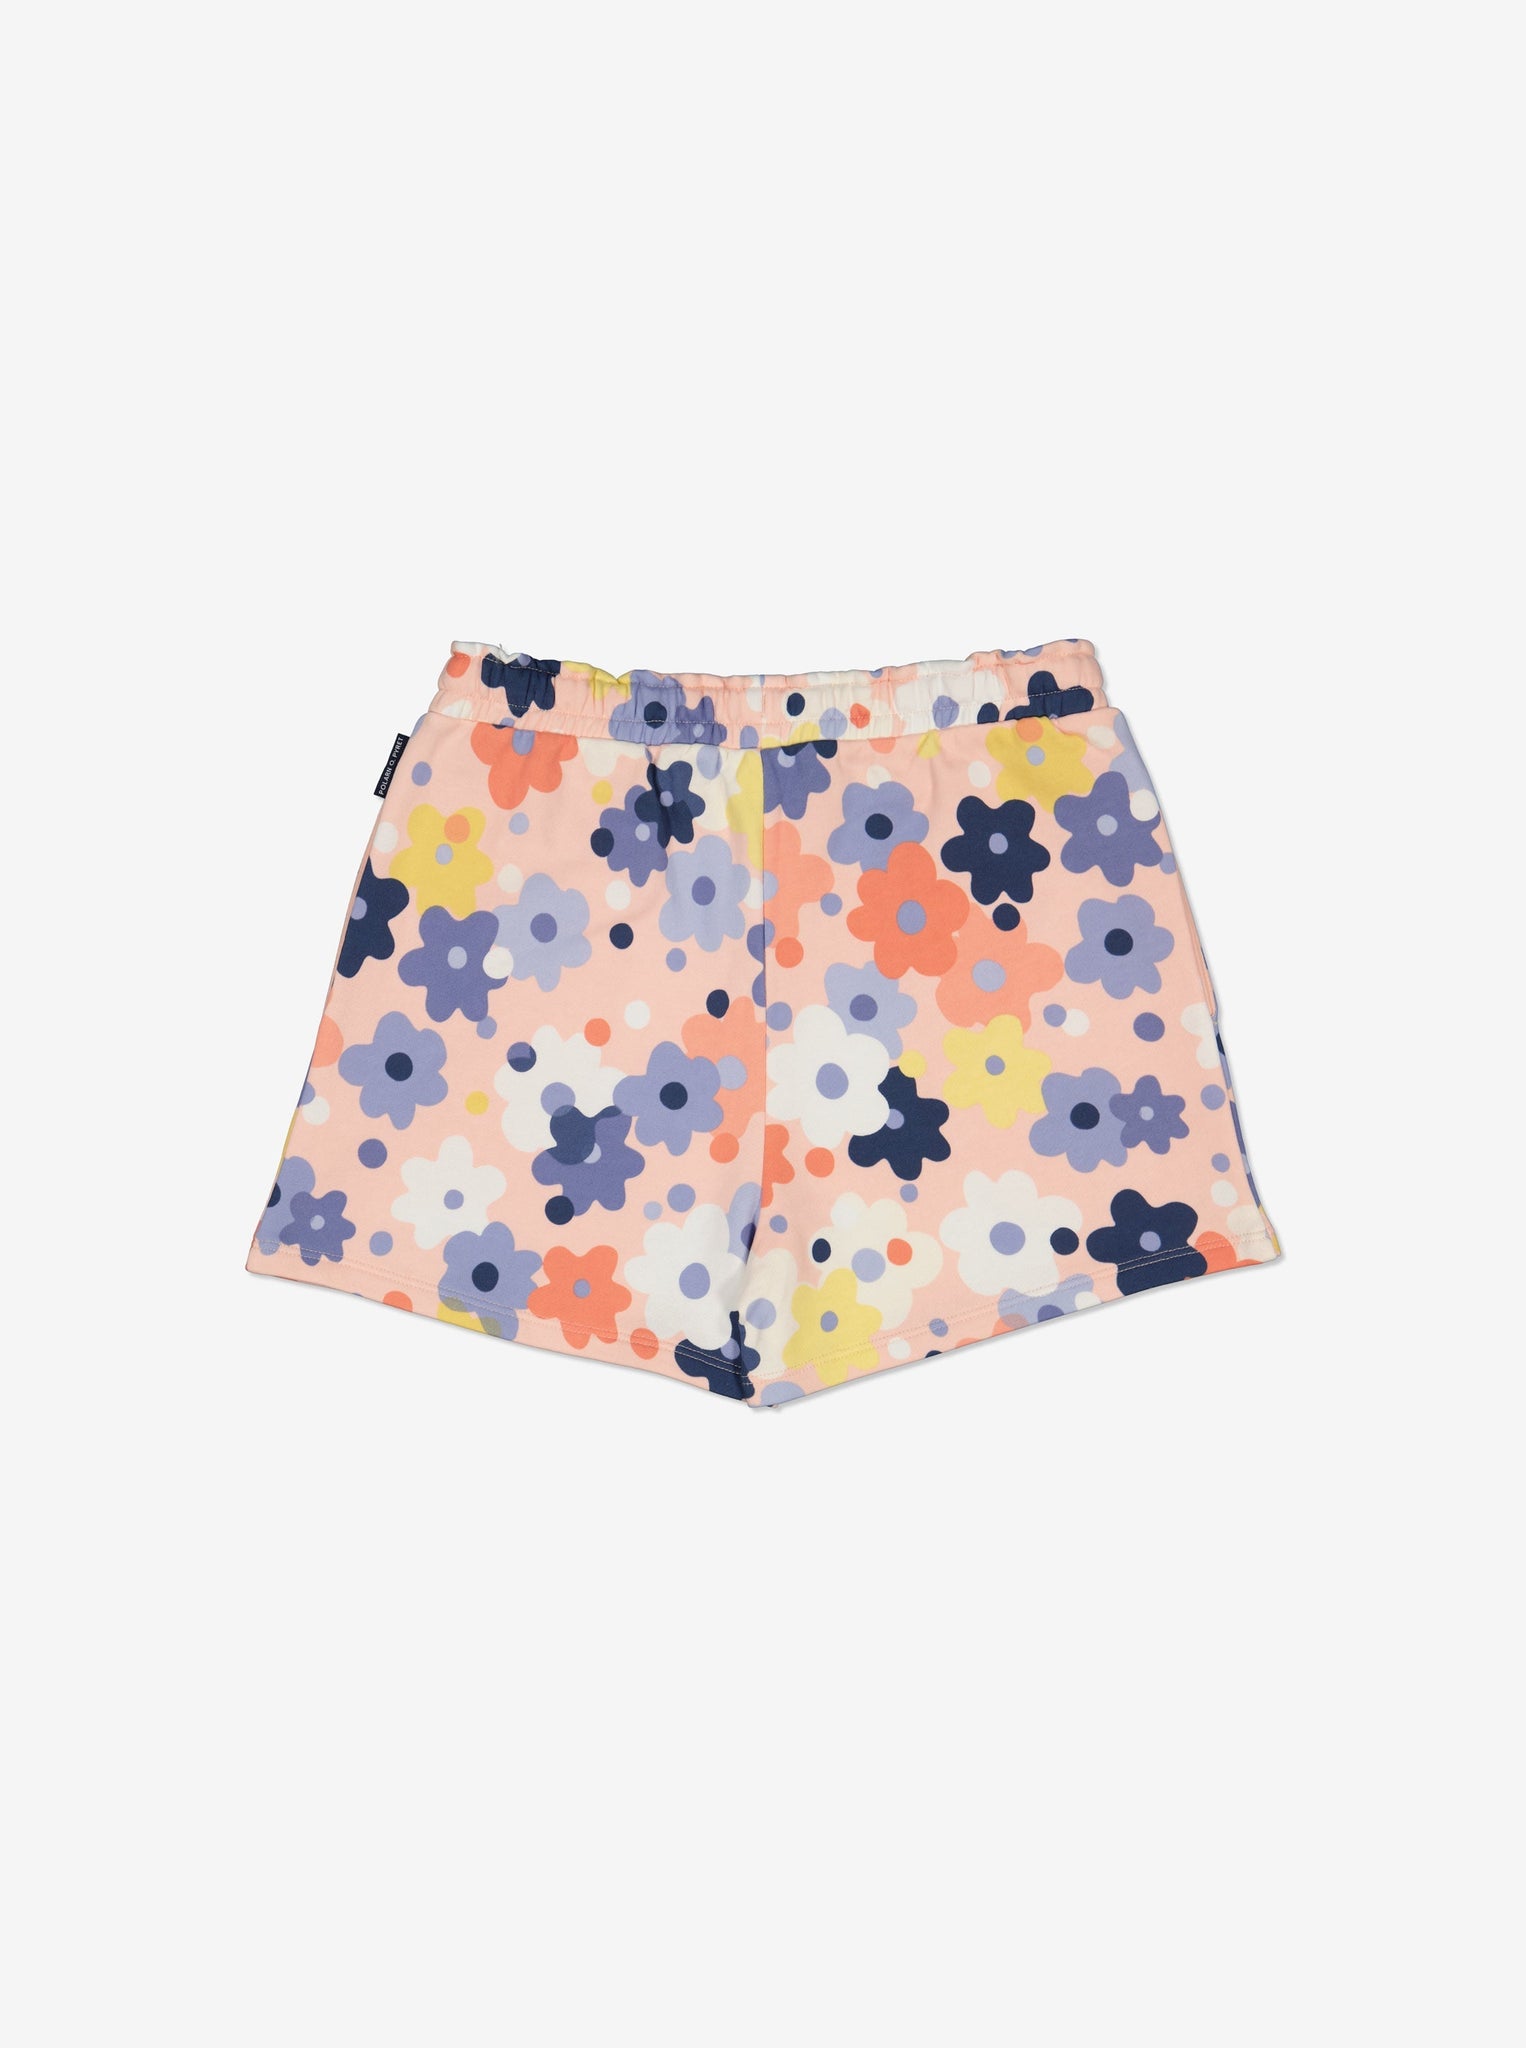 Organic Cotton Floral Girls Shorts from Polarn O. Pyret Kidswear. Made from 100% GOTS Organic Cotton.